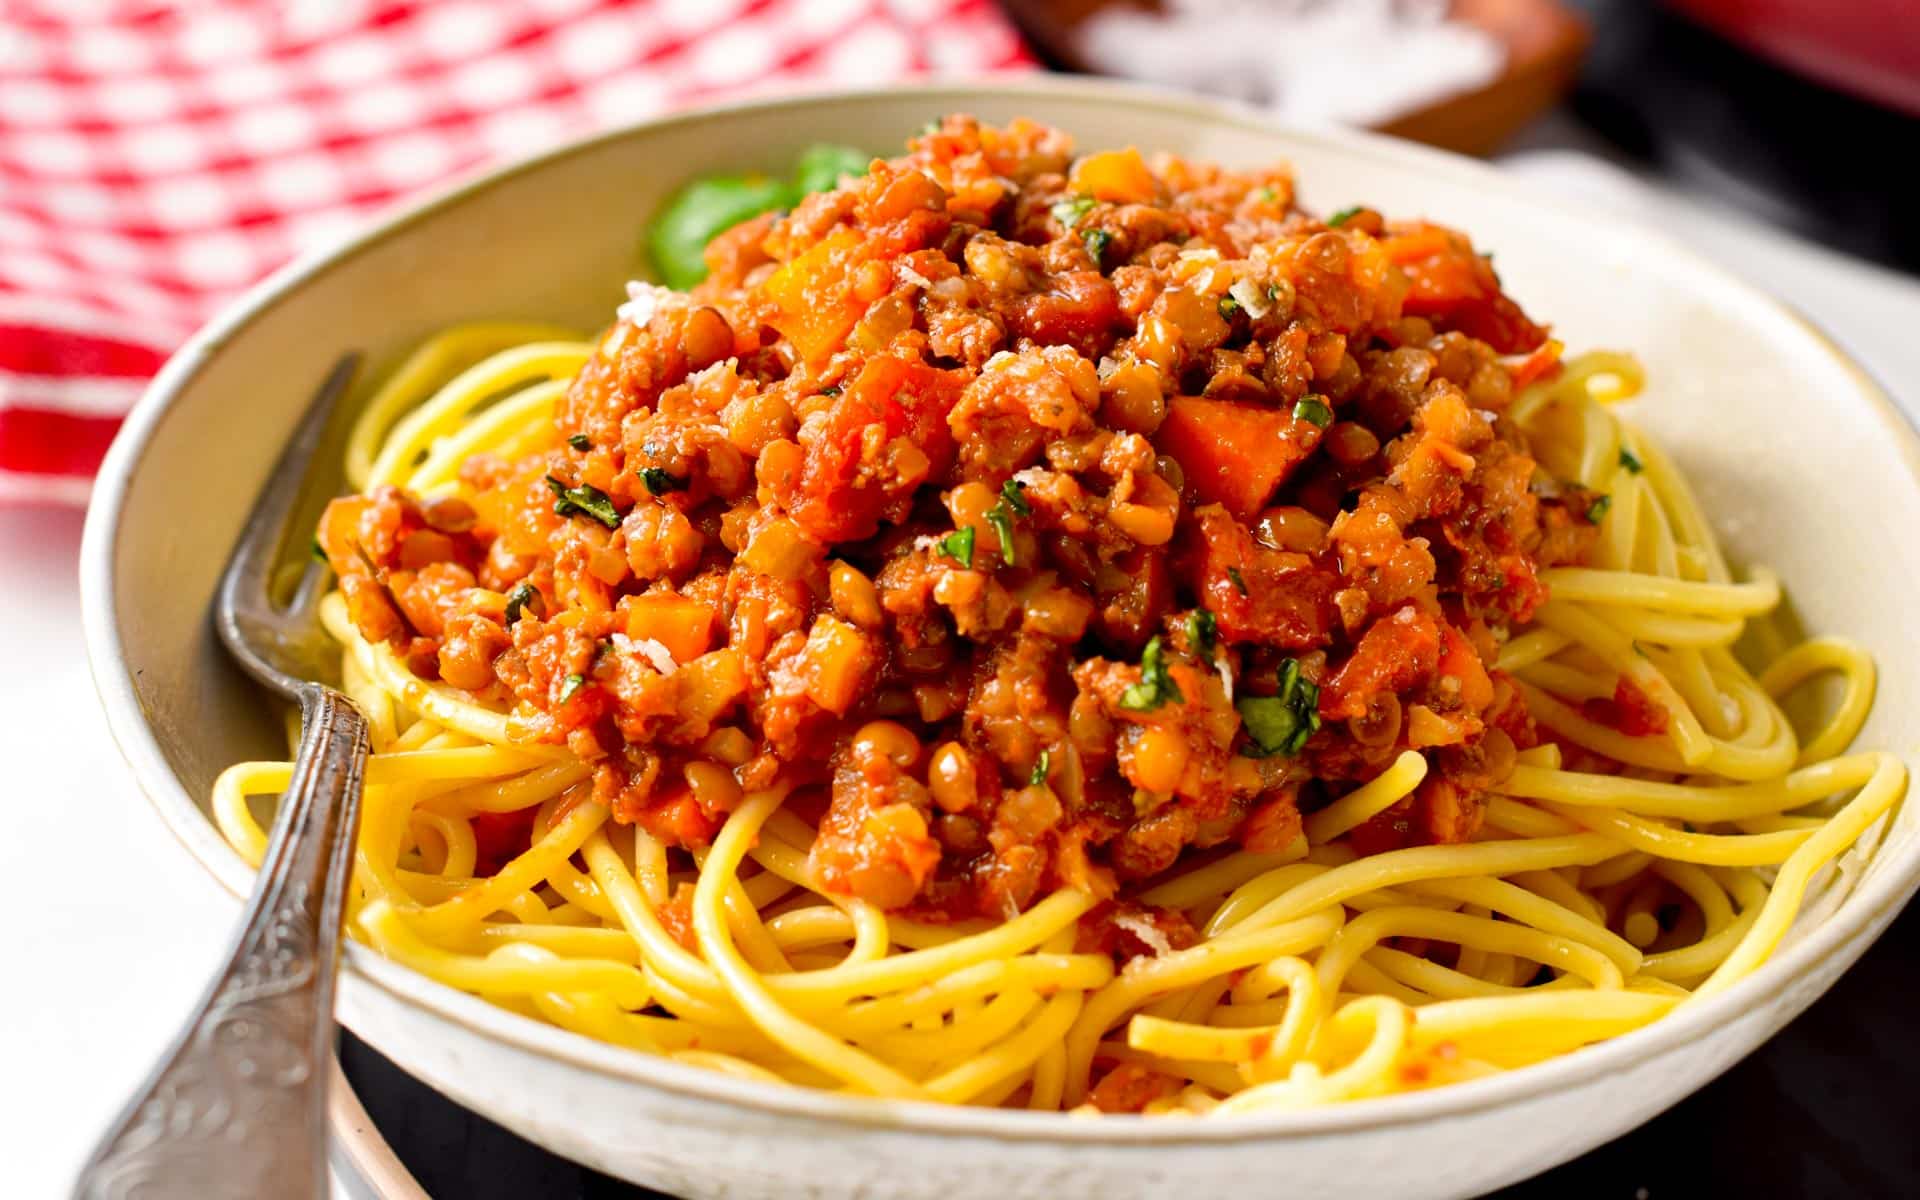 Vegan Bolognese sauce on cooked spaghetti in a large plate with a silver fork.